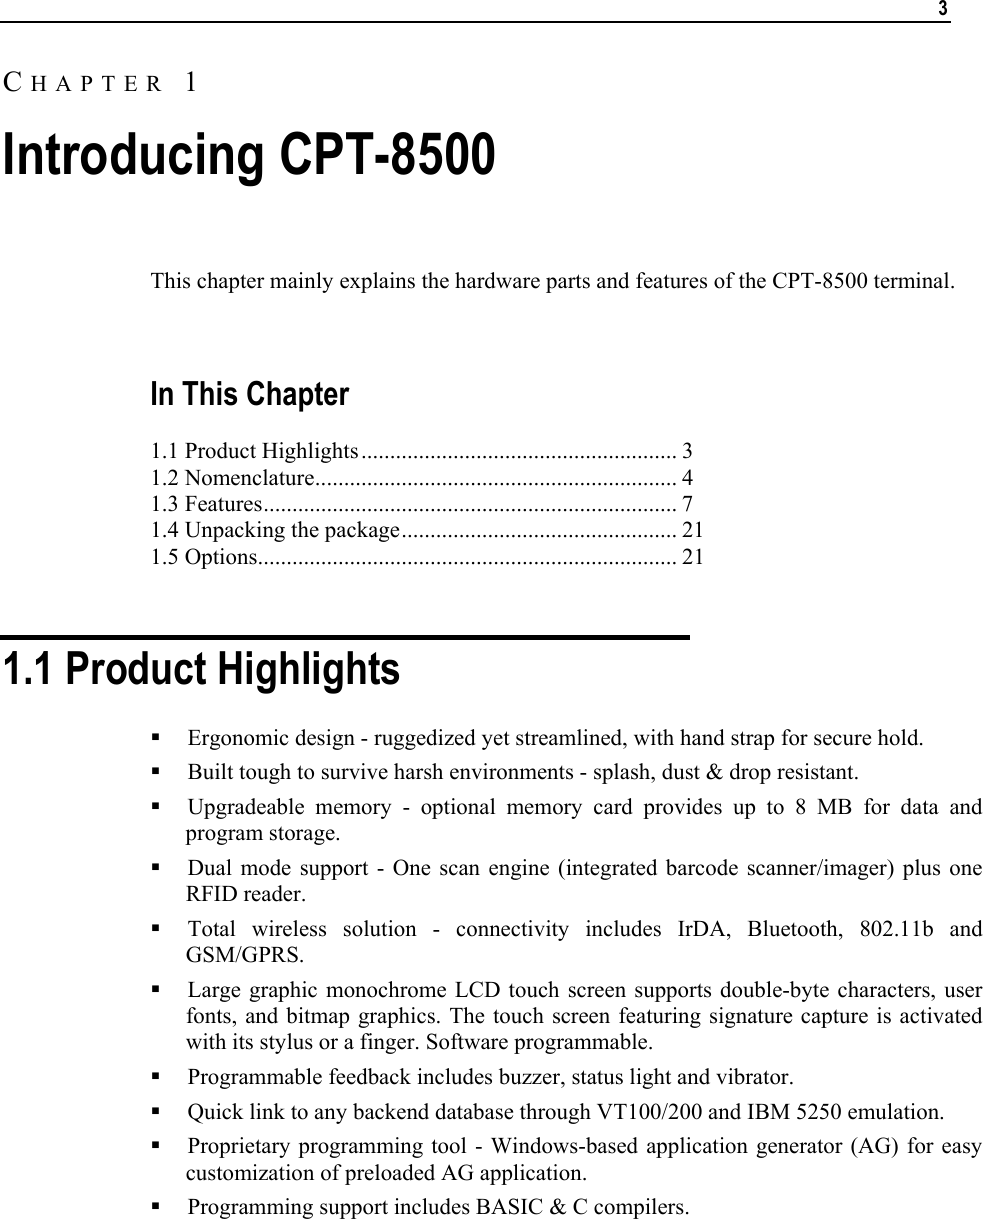   3  This chapter mainly explains the hardware parts and features of the CPT-8500 terminal.   In This Chapter 1.1 Product Highlights....................................................... 3 1.2 Nomenclature............................................................... 4 1.3 Features........................................................................ 7 1.4 Unpacking the package................................................ 21 1.5 Options......................................................................... 21   1.1 Product Highlights  Ergonomic design - ruggedized yet streamlined, with hand strap for secure hold.   Built tough to survive harsh environments - splash, dust &amp; drop resistant.  Upgradeable memory - optional memory card provides up to 8 MB for data and program storage.  Dual mode support - One scan engine (integrated barcode scanner/imager) plus one RFID reader.  Total wireless solution - connectivity includes IrDA, Bluetooth, 802.11b and GSM/GPRS.  Large graphic monochrome LCD touch screen supports double-byte characters, user fonts, and bitmap graphics. The touch screen featuring signature capture is activated with its stylus or a finger. Software programmable.  Programmable feedback includes buzzer, status light and vibrator.  Quick link to any backend database through VT100/200 and IBM 5250 emulation.  Proprietary programming tool - Windows-based application generator (AG) for easy customization of preloaded AG application.  Programming support includes BASIC &amp; C compilers.  CHAPTER 1 Introducing CPT-8500 